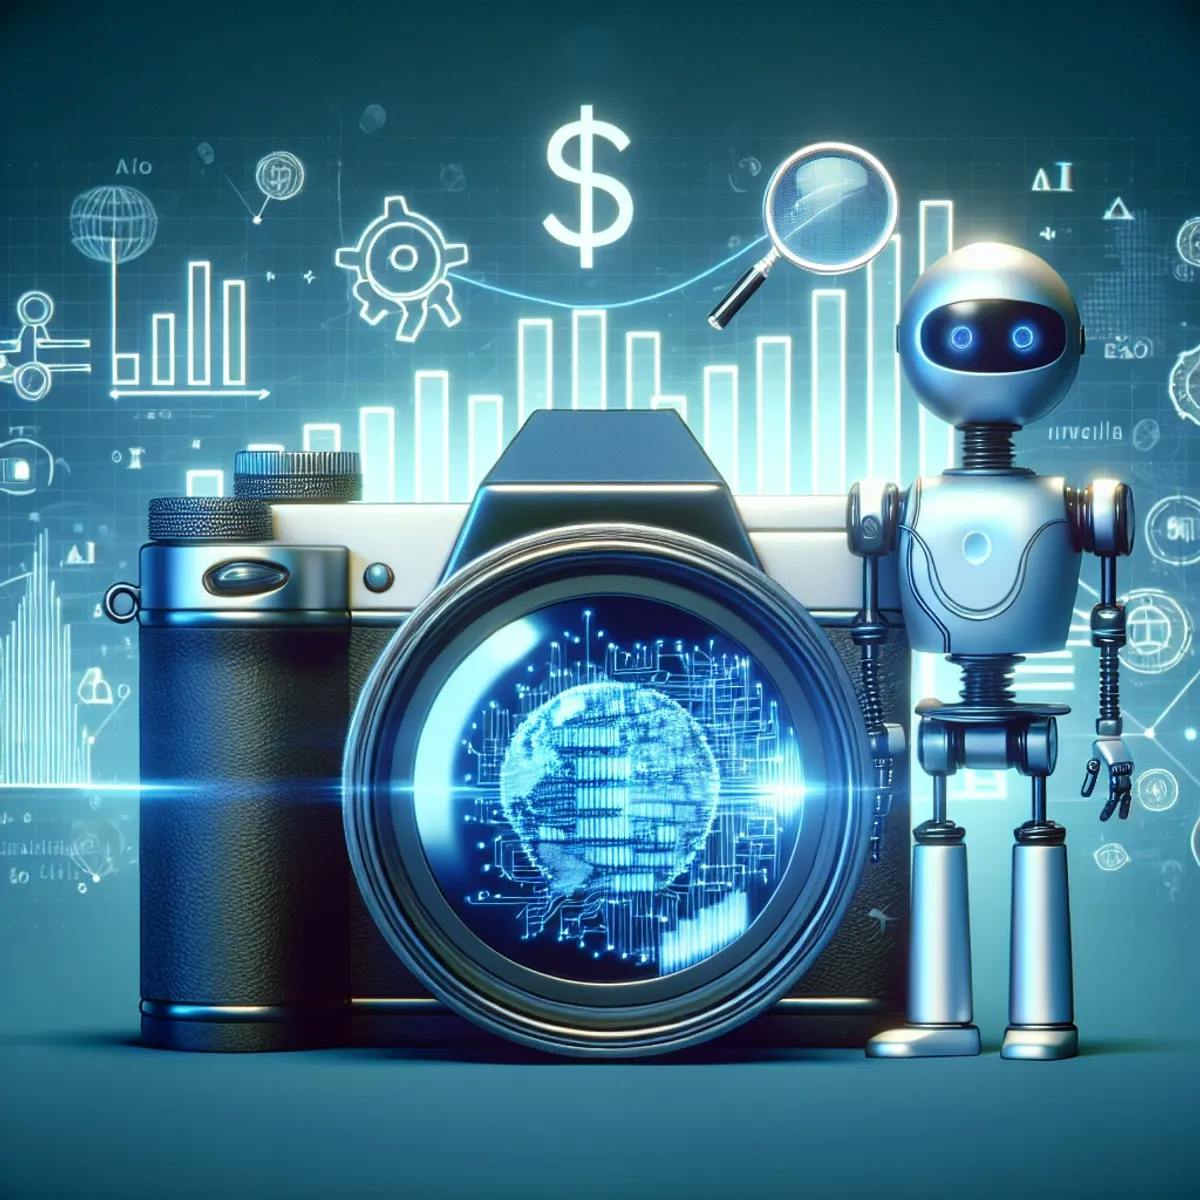 AI SEO for photographers: A digital camera with a lens reflecting complex algorithms and bar graphs symbolizing SEO, with an AI robot in the background holding a magnifying glass.